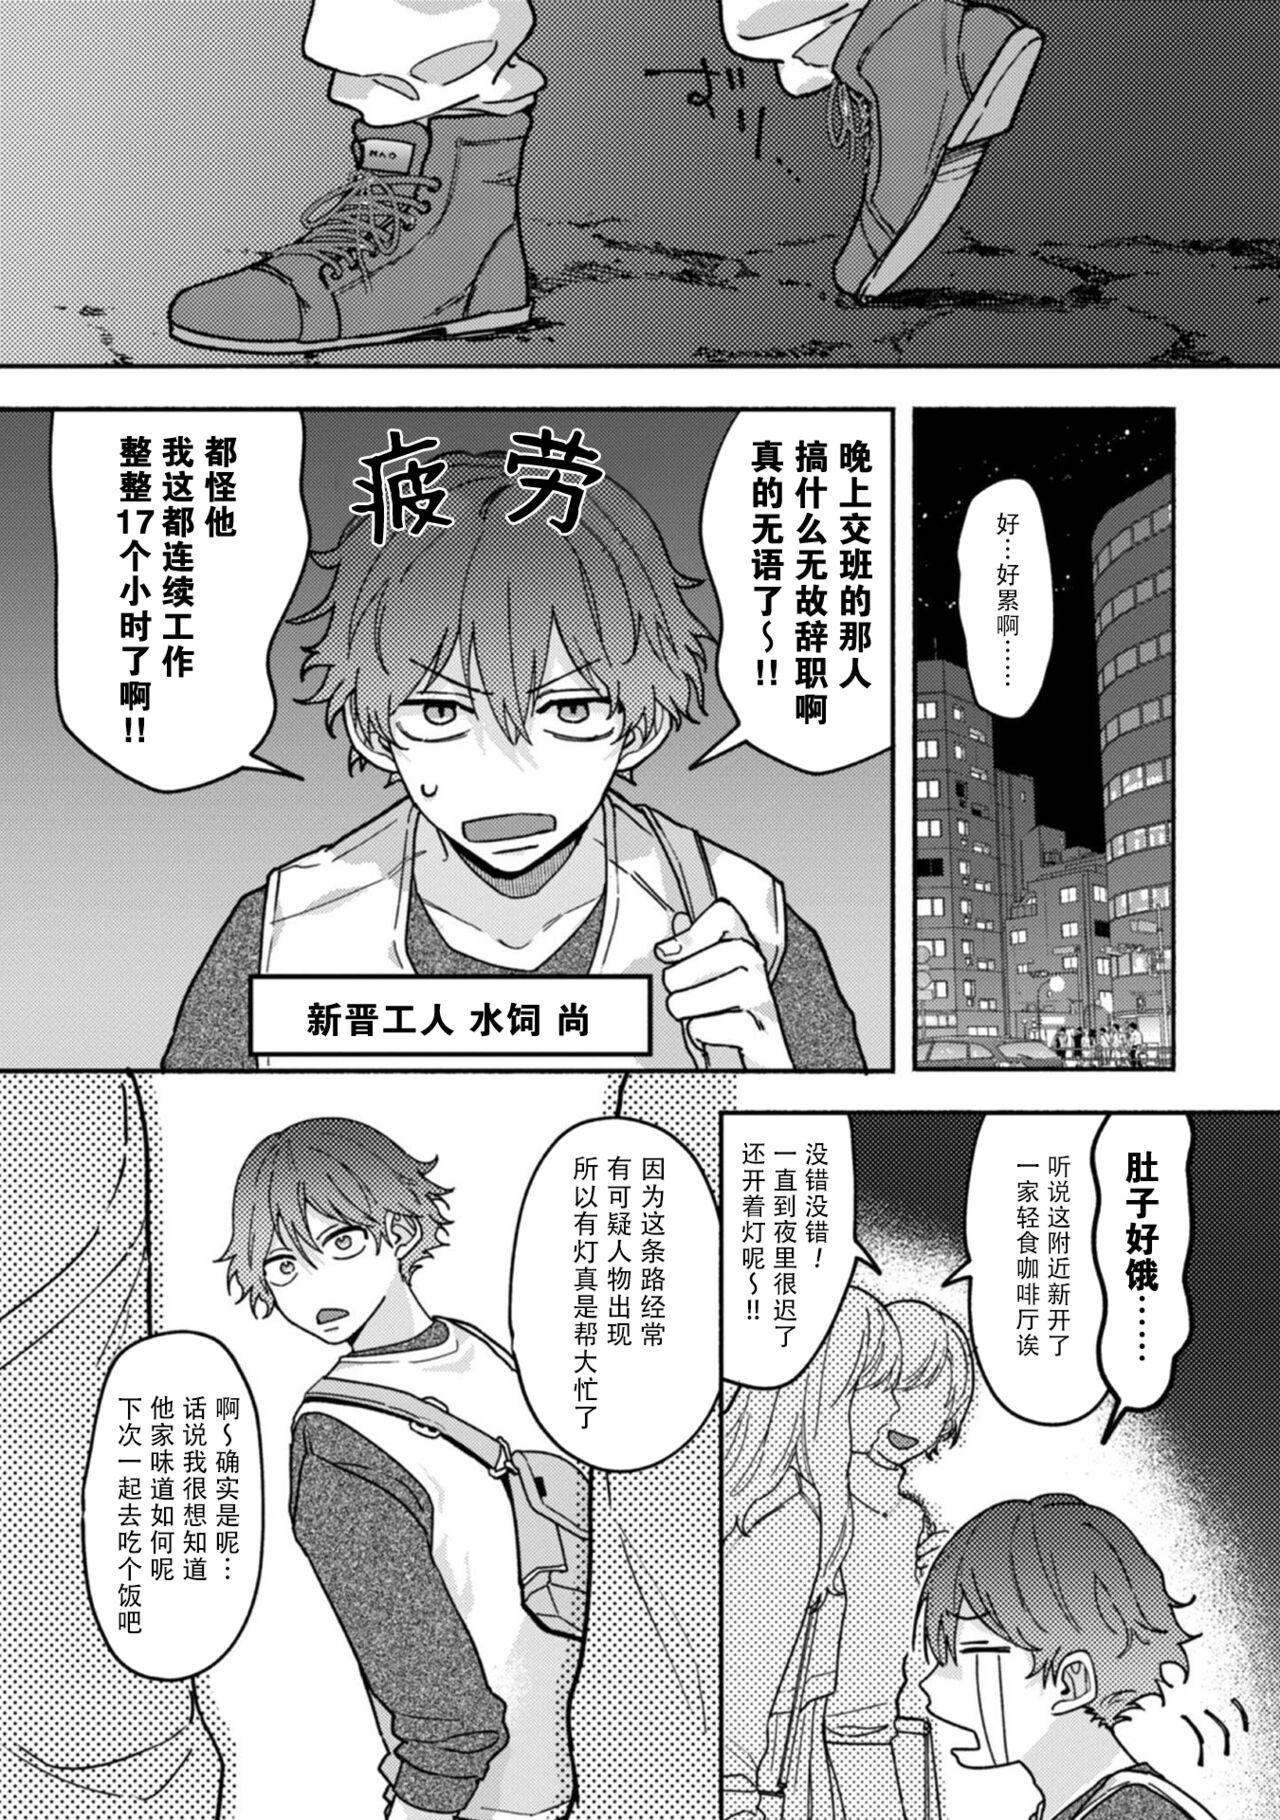 Strap On Uso to Yellowknife | 谎言与黄色小刀 Sextape - Page 6